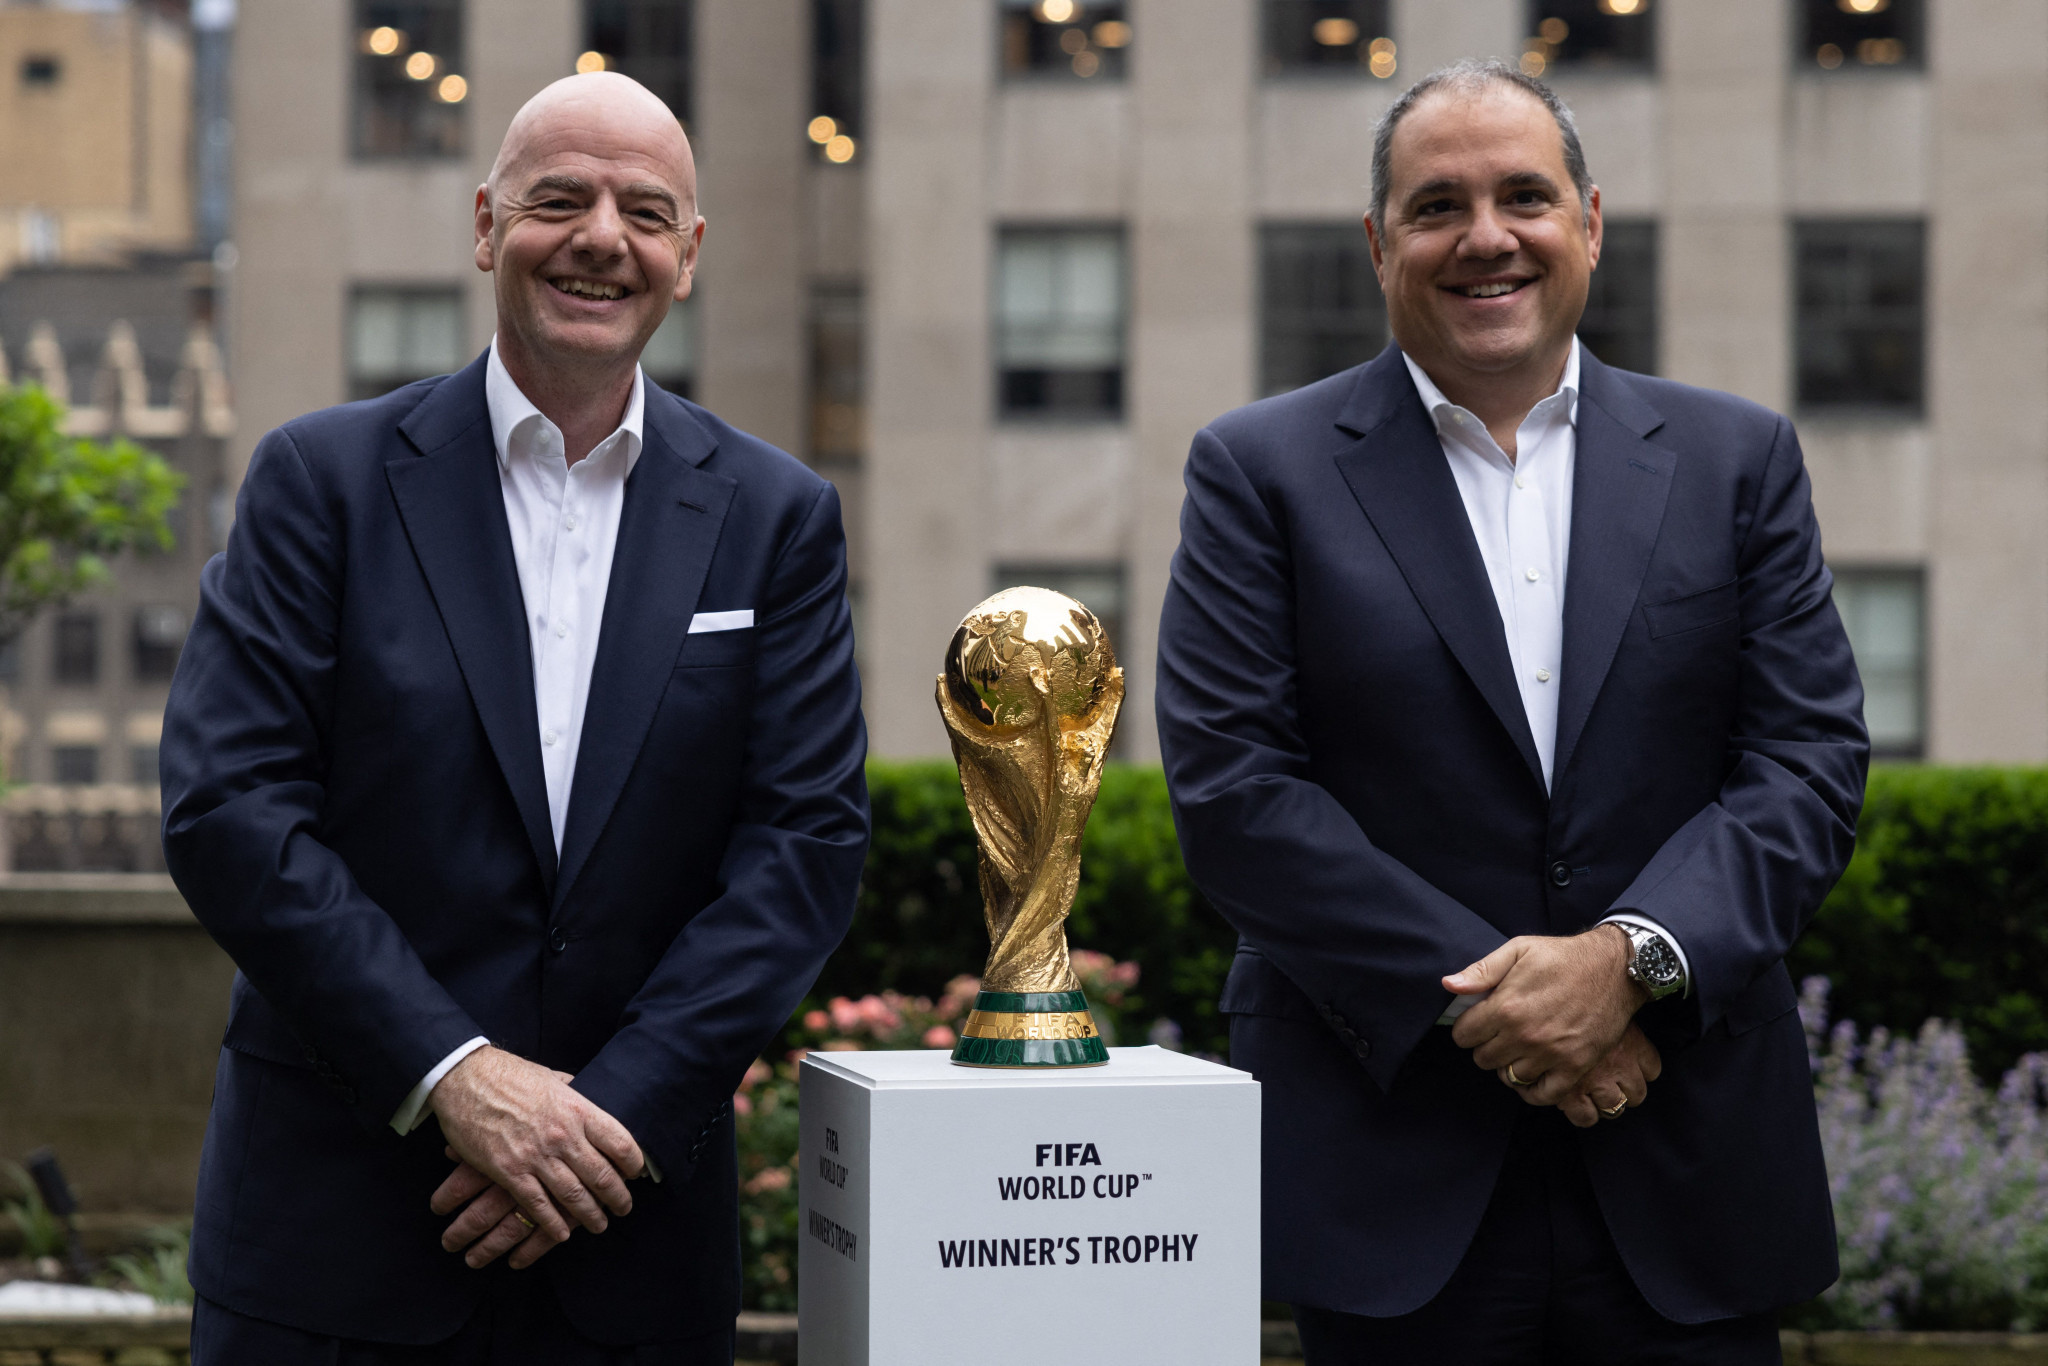 The Presidents of FIFA and CONCACAF Gianni infantino and Victor Montagliani with the 2026 FIFA World Cup trophy ©Getty Images